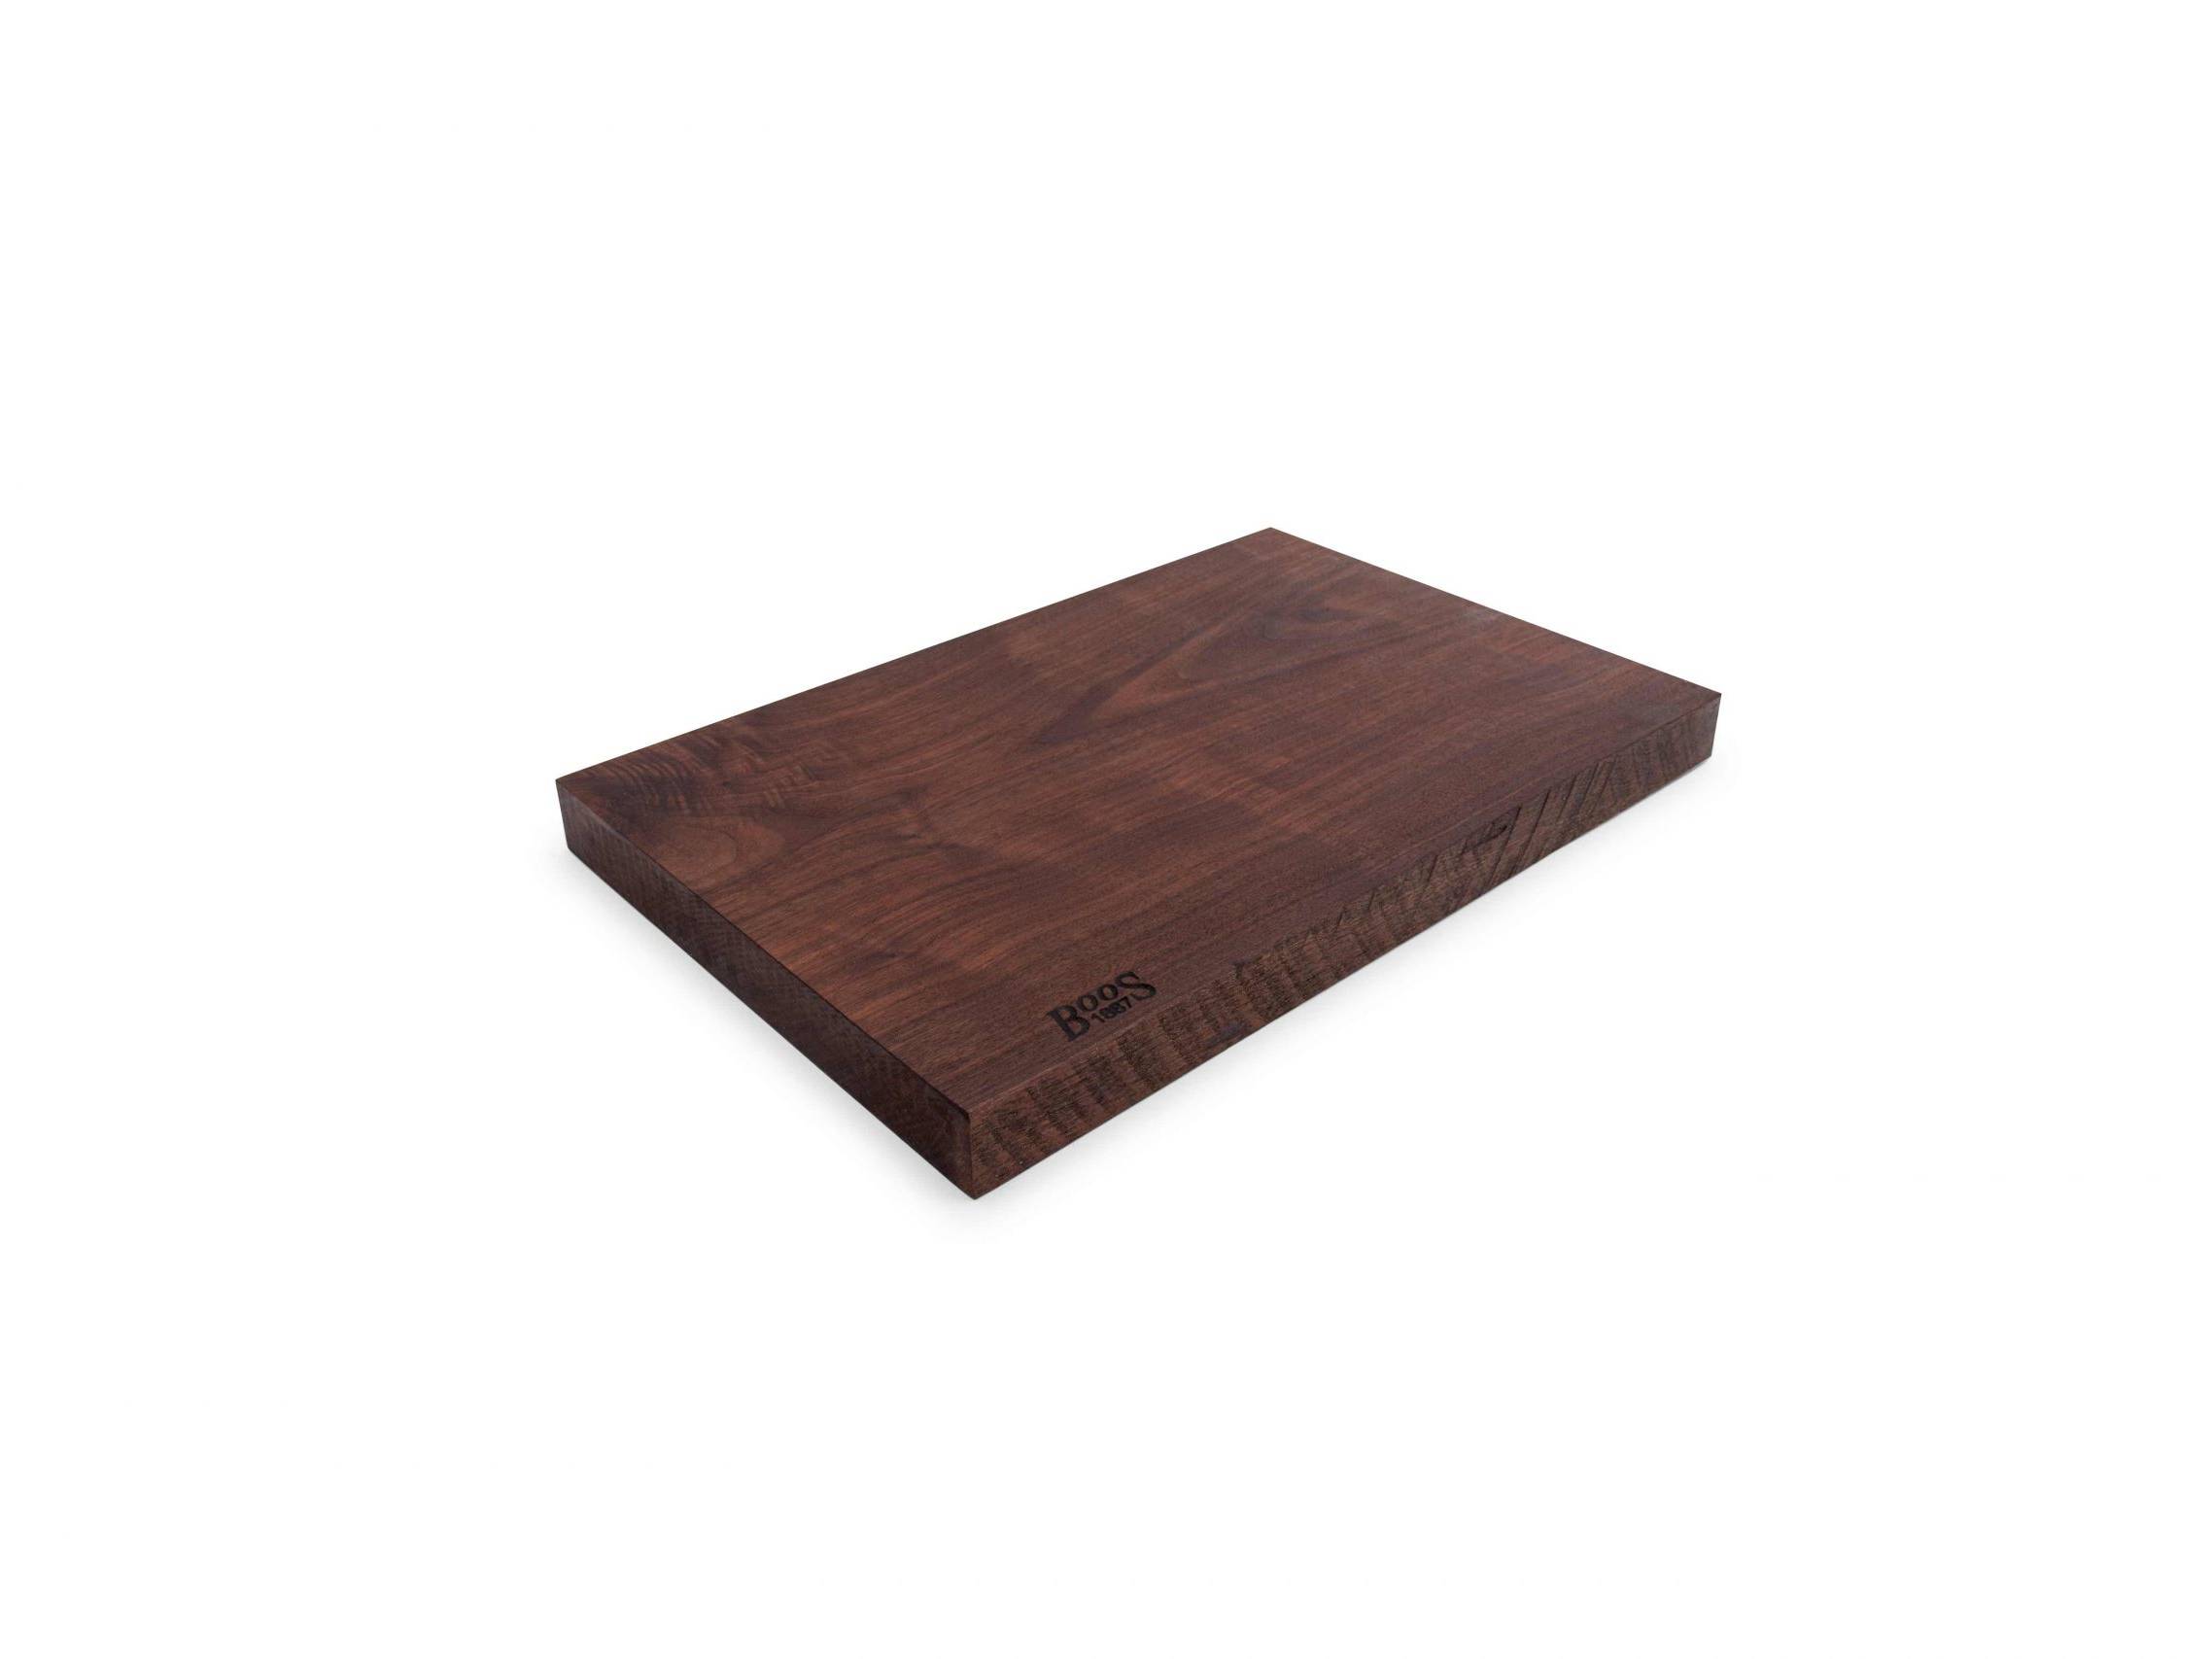 Boos 1887 / Rustic Edge one piece cutting board; Black Walnut; can be used on both sides 49